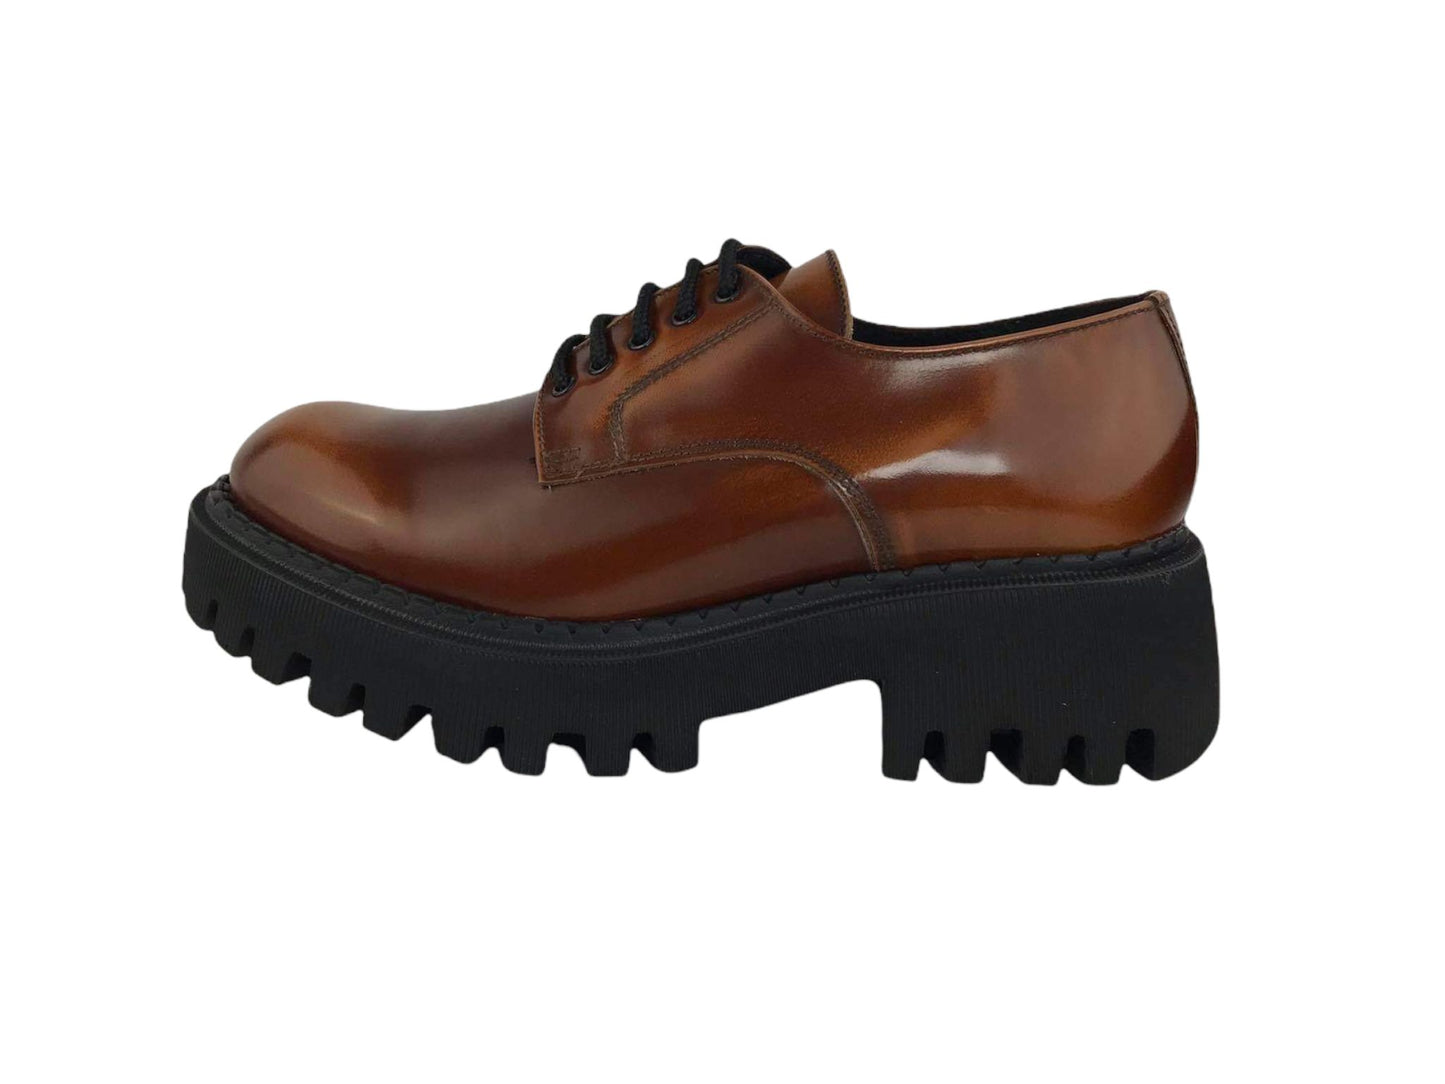 marnate | Women's Ambra Oxford style shoes with caramel color waxed leather laces